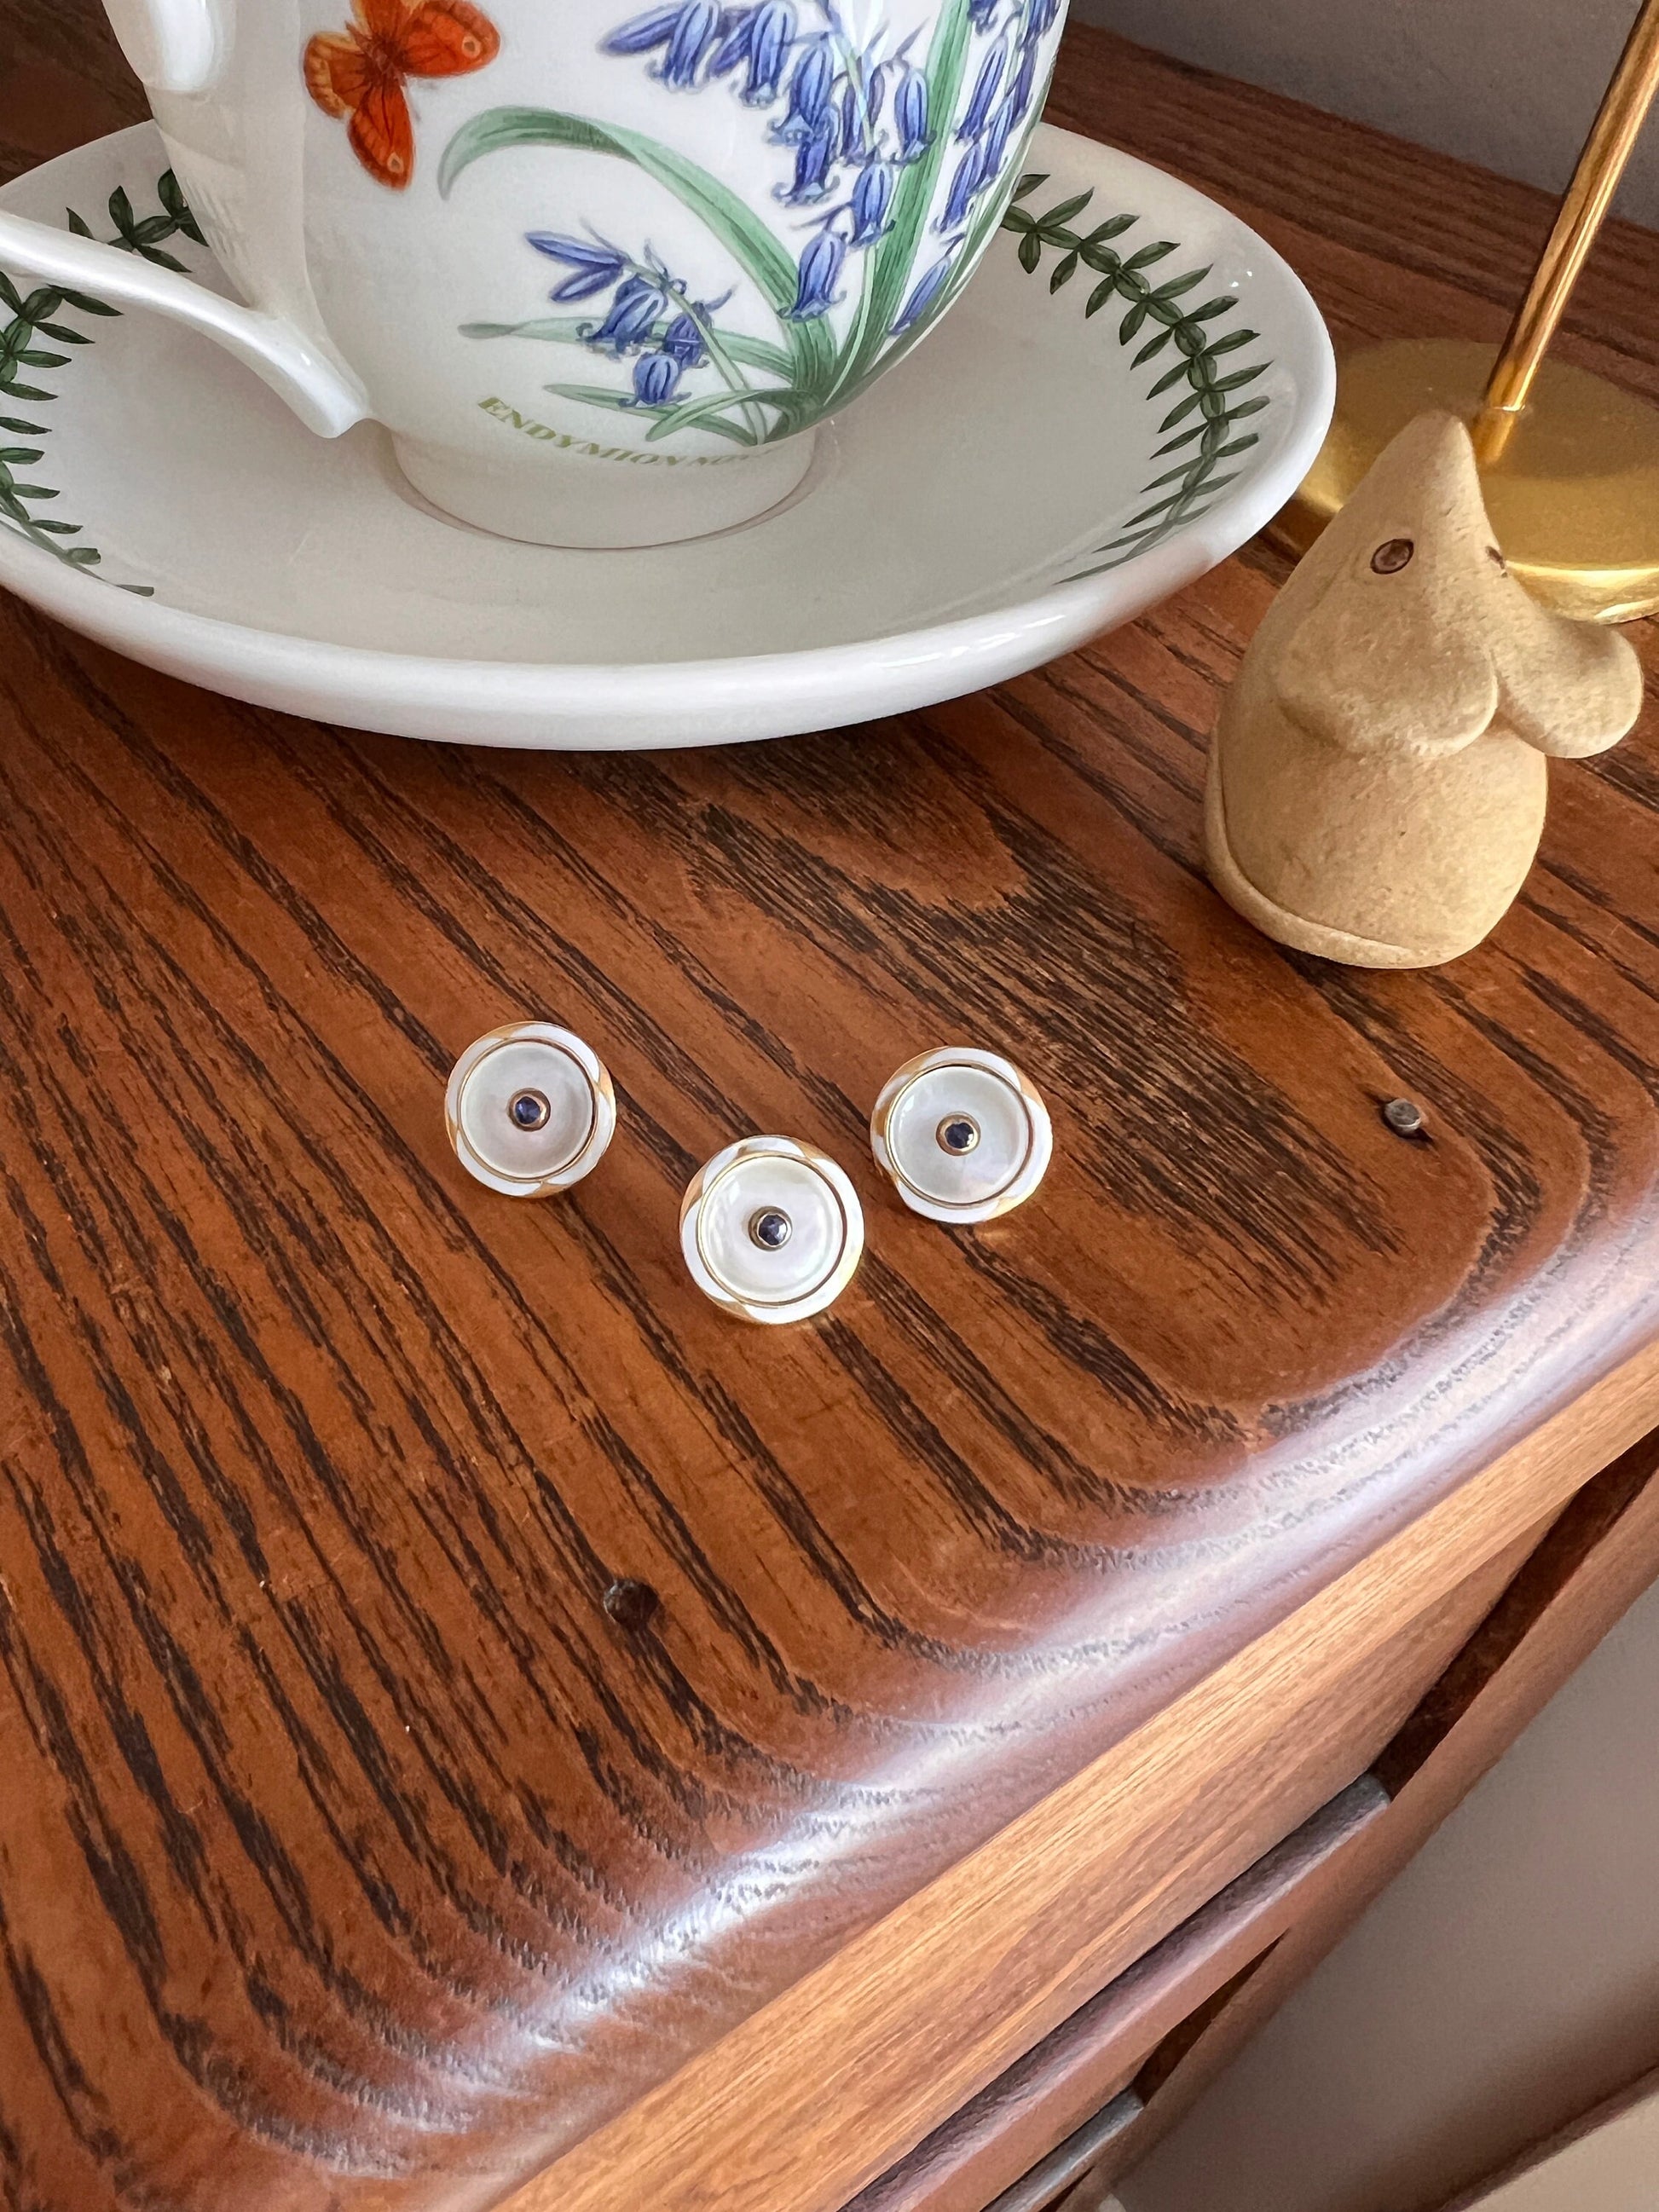 SET of THREE SAPPHIRE Mother of Pearl White Enamel Art Deco French Antique Charms Buttons 18k Gold Conversion Earrings Pendant Belle Epoque